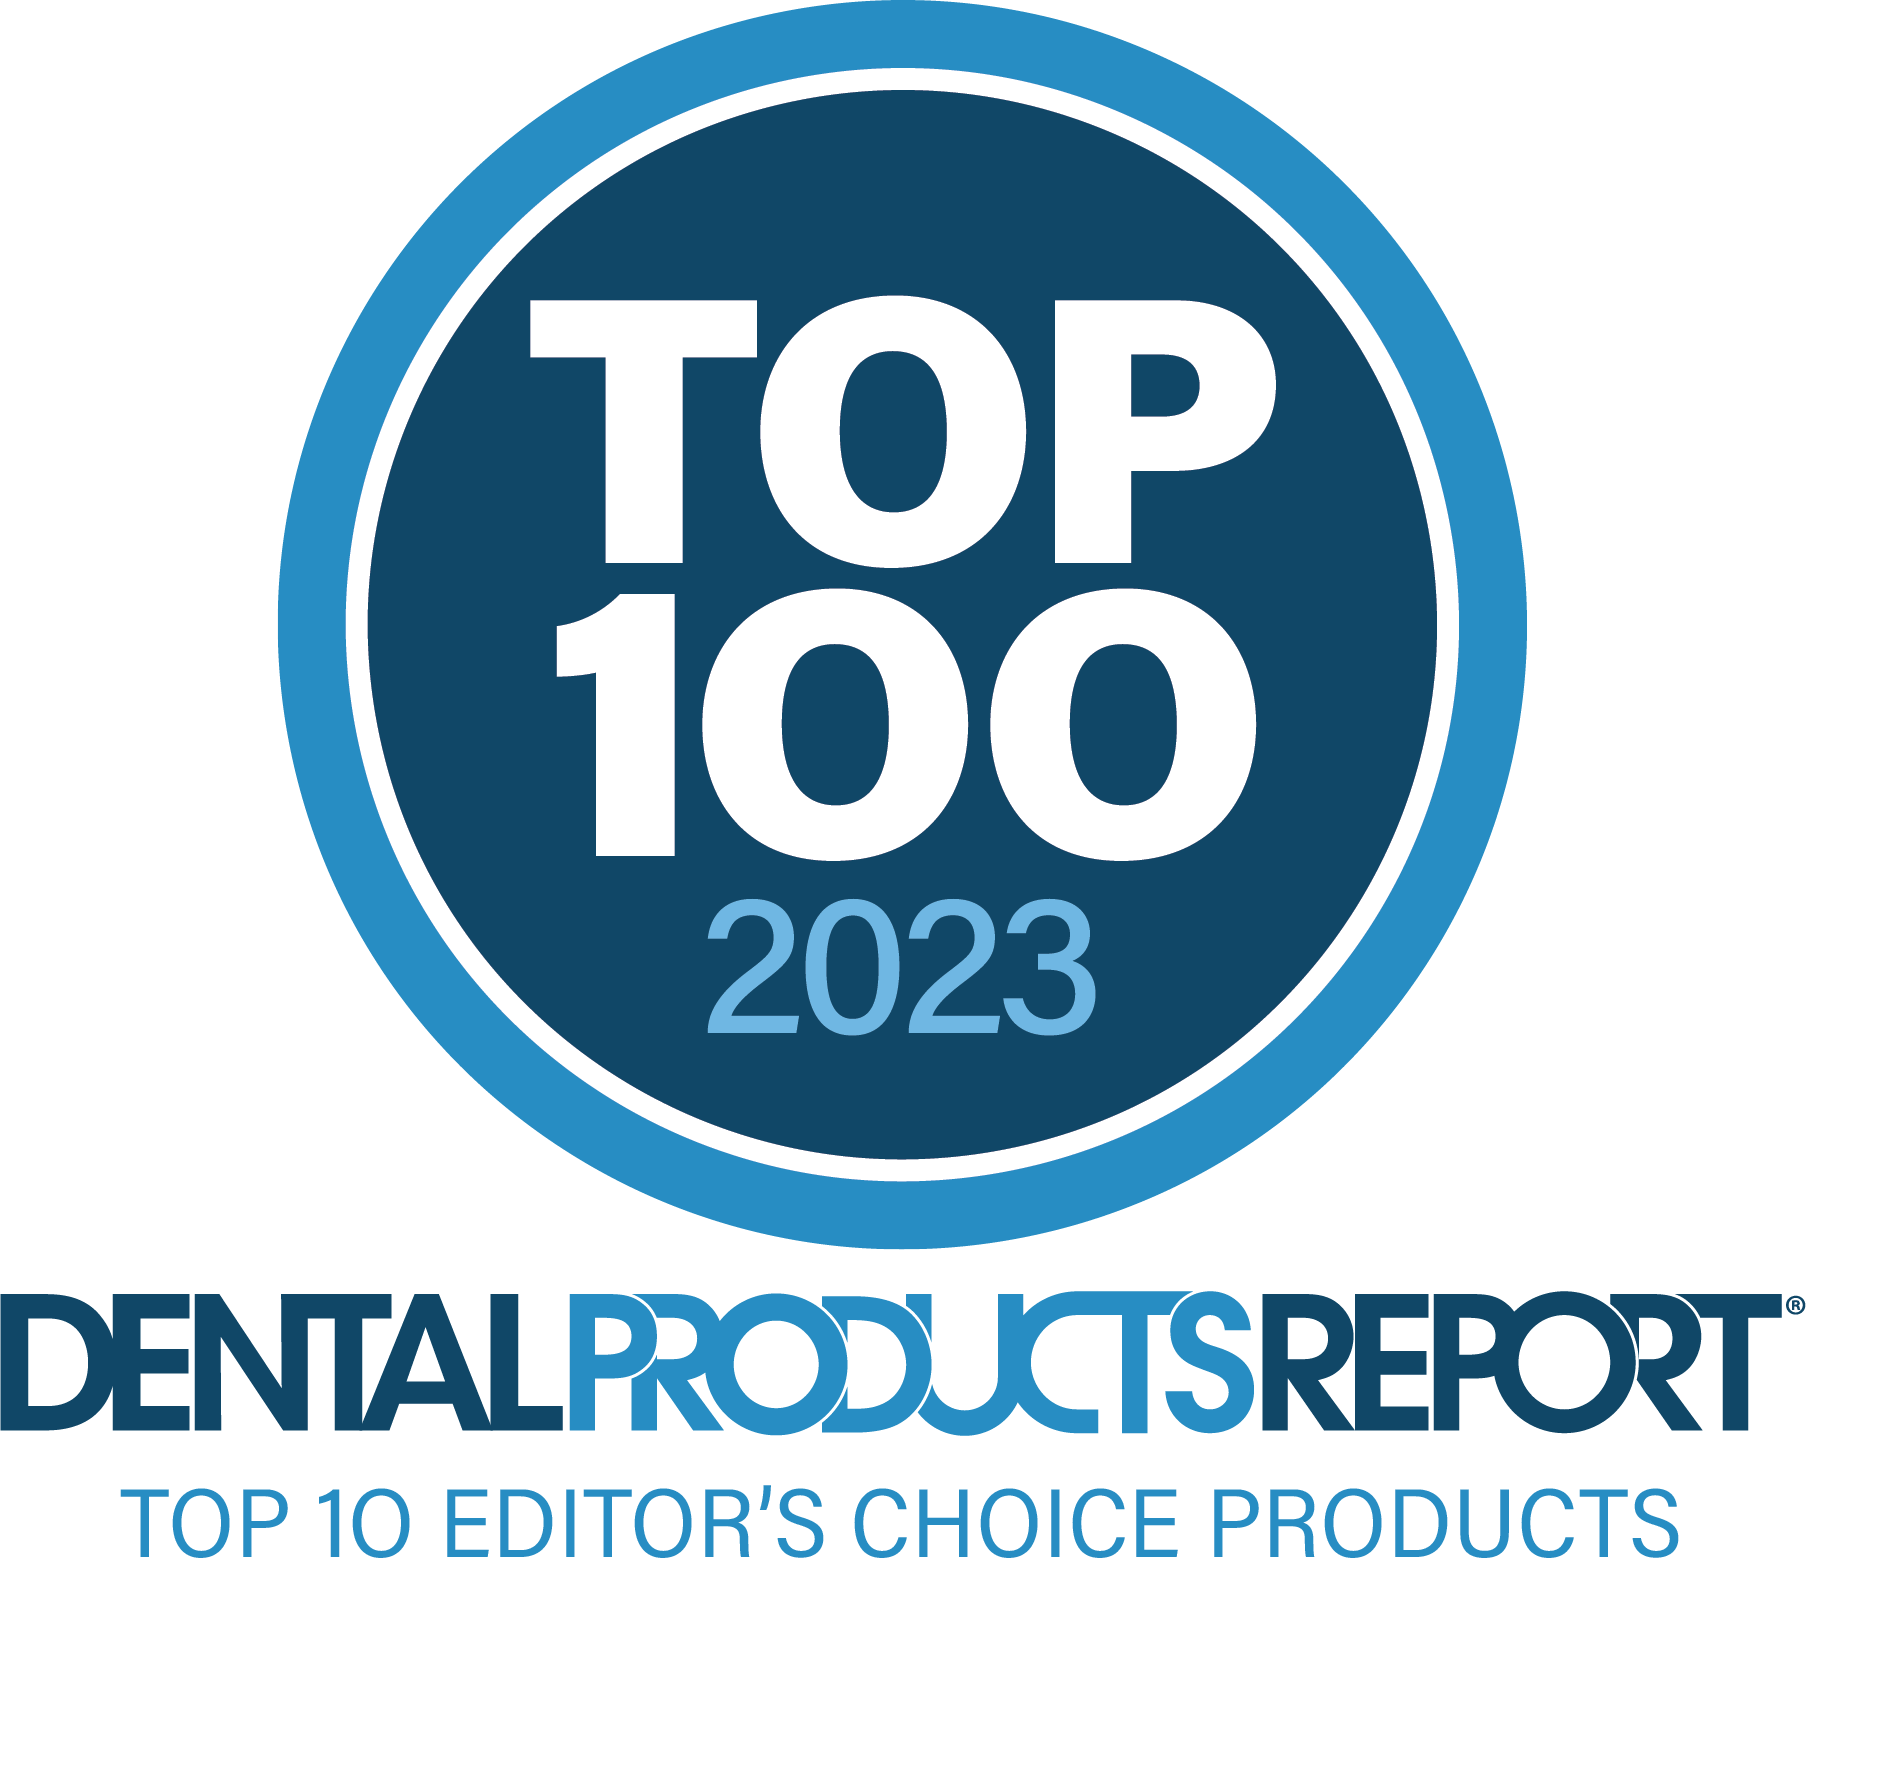 DPR Top 100: The Top 10 Editor's Choice Products of 2023